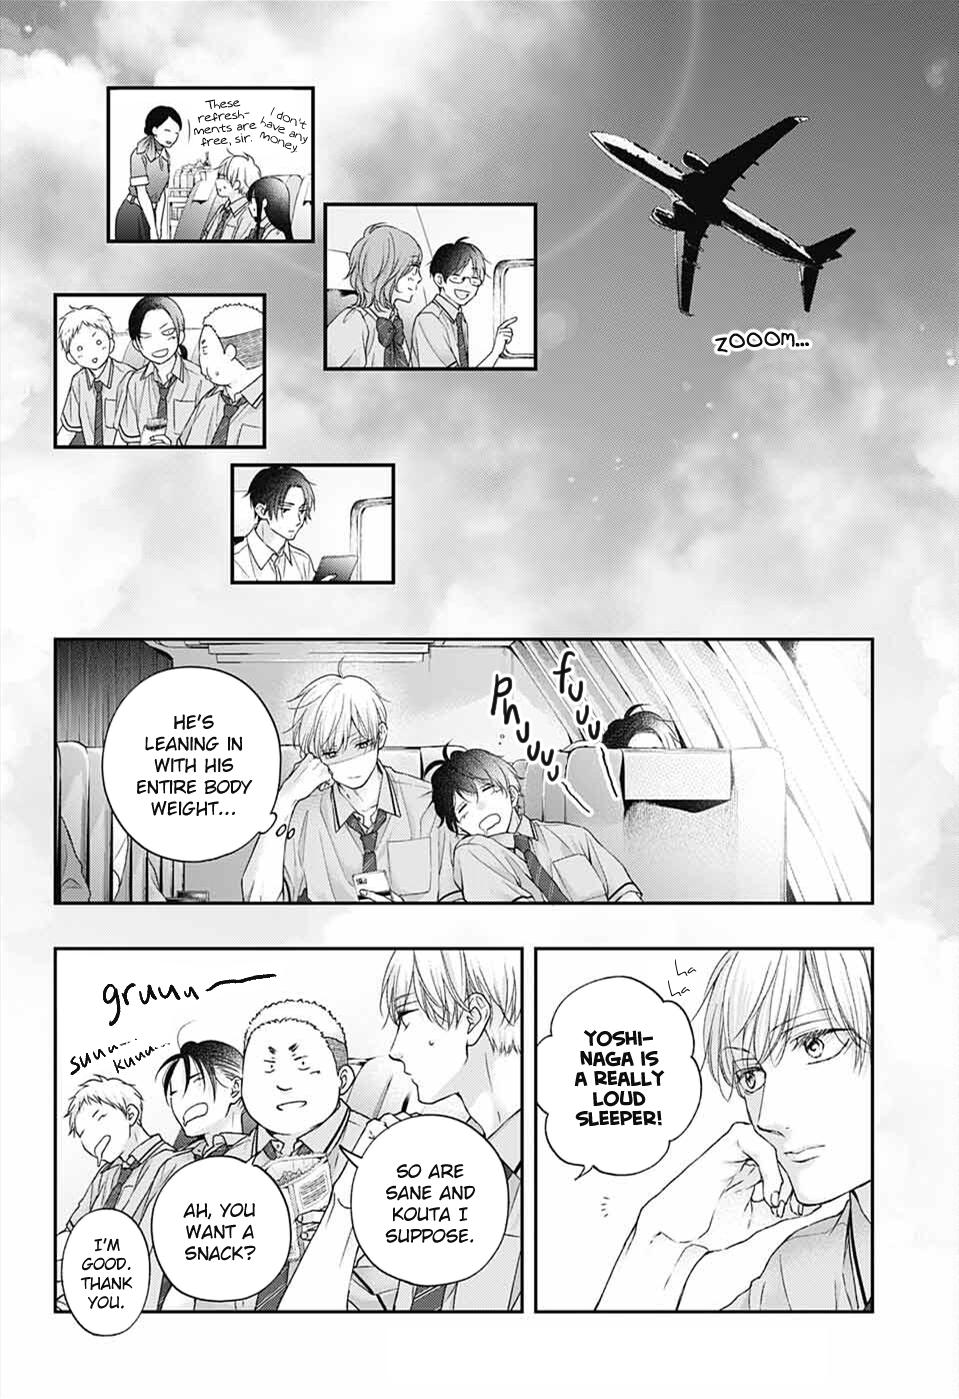 Kono Oto Tomare!, Chapter 103  TcbScans Net - TCBscans - Free